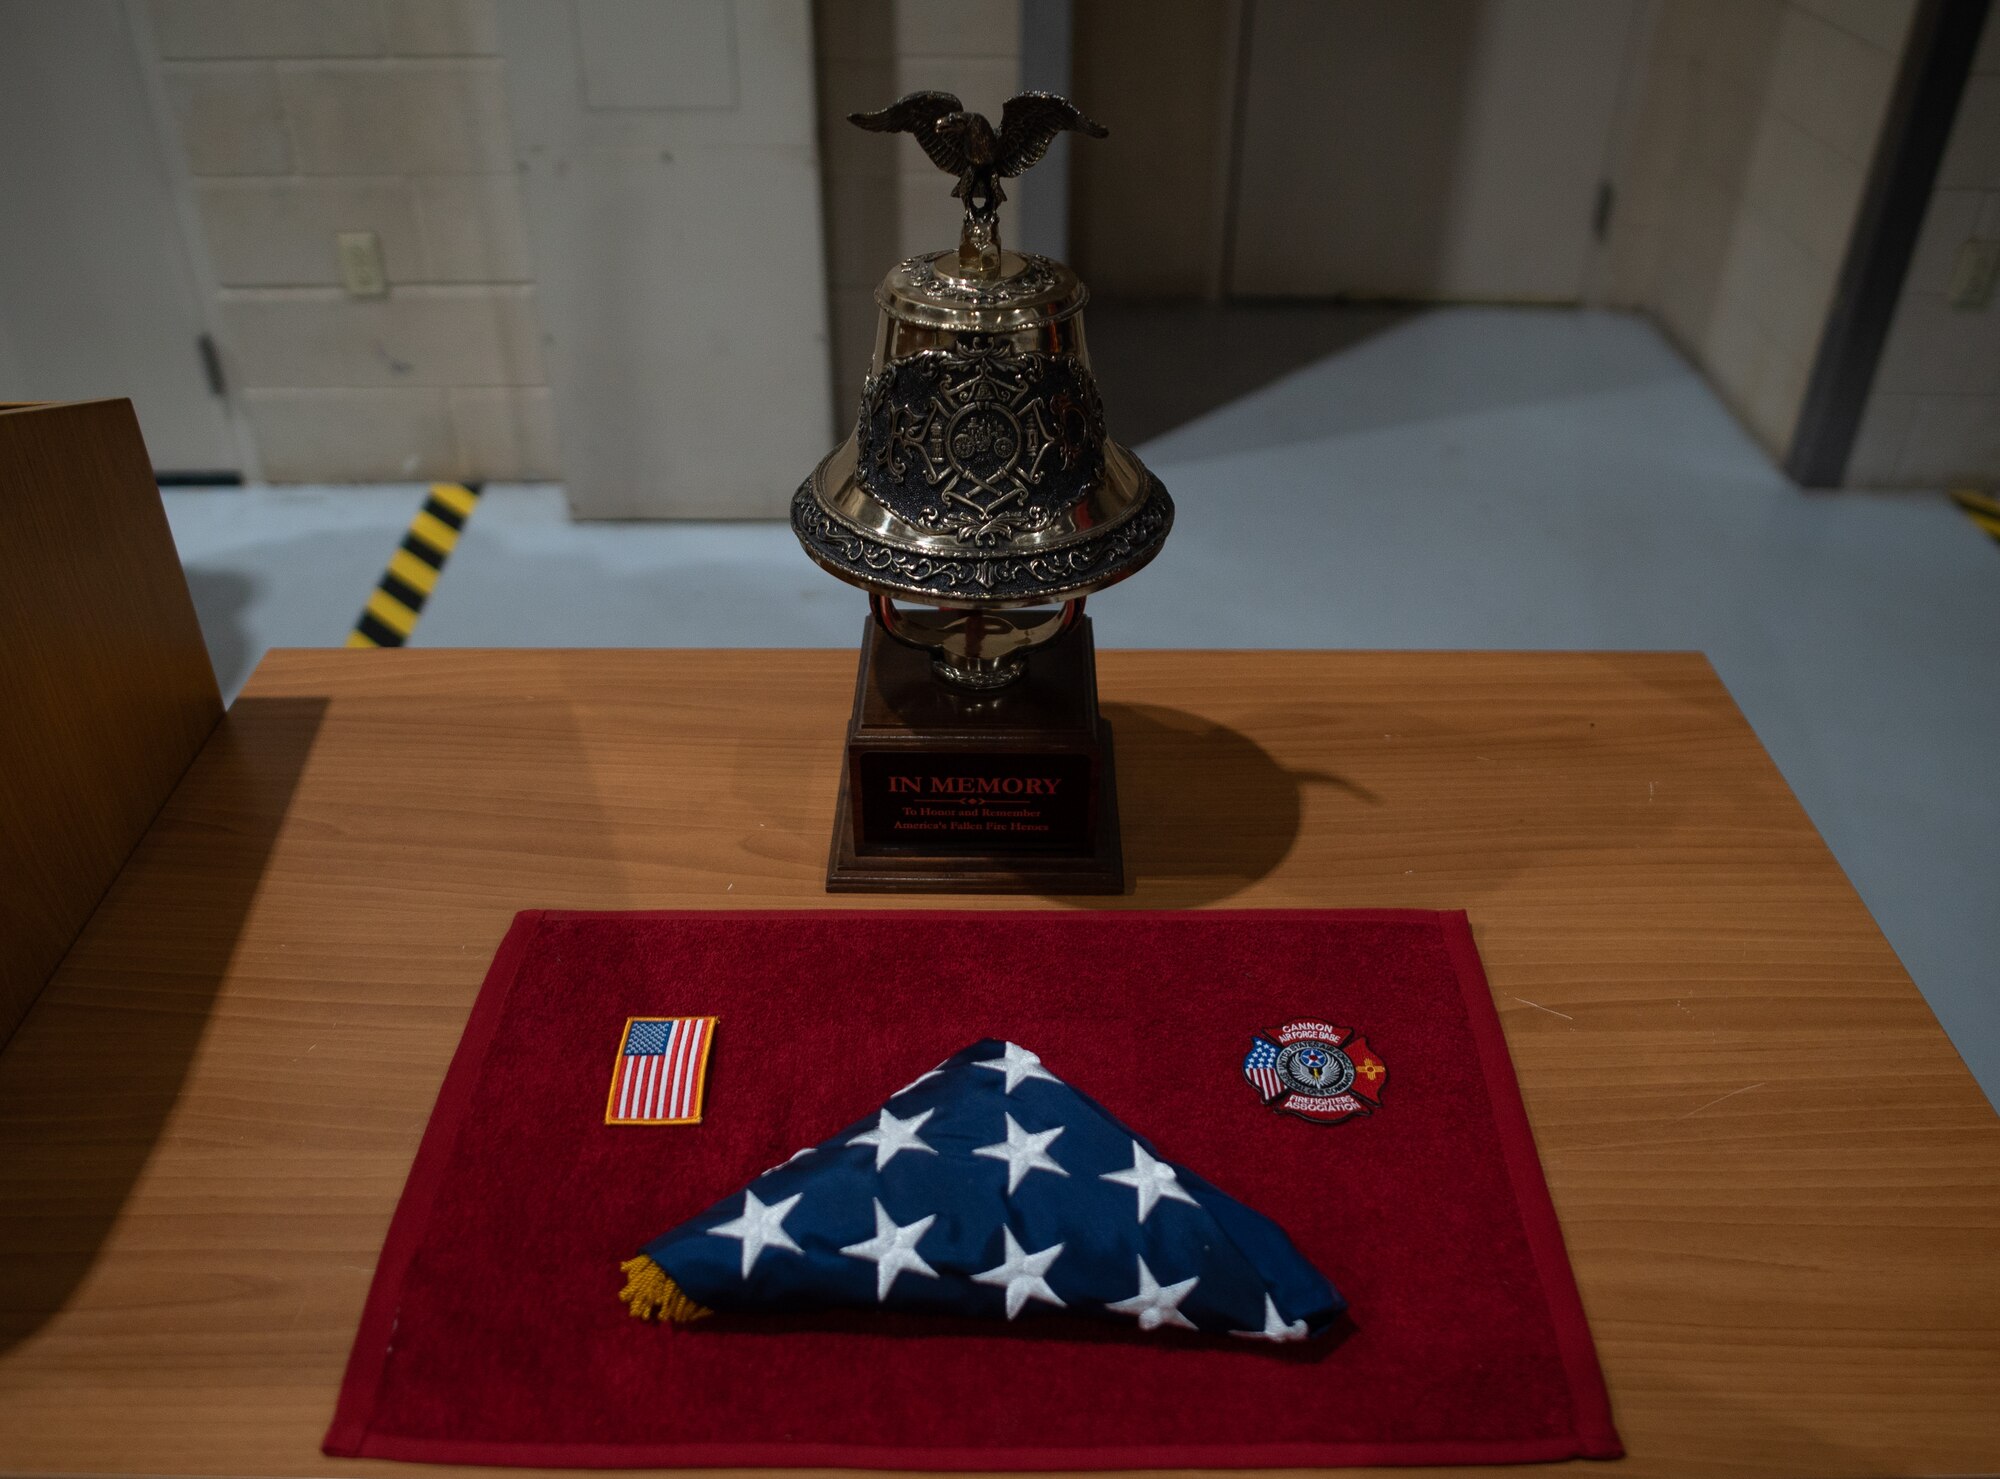 An American flag, patch, Cannon Air Force Base fire emergency services patch and ceremonial bell form part of a memorial to 9/11 during a ceremony at Cannon Air Force Base, N.M., Sep. 11, 2021. The memorial marked the 20th anniversary since the terrorist attacks on the United States in 2001 and included a nine-story stair climb in honor of the first responders who lost their lives responding to the attacks. (U.S. Air Force photo by Senior Airman Christopher Storer)